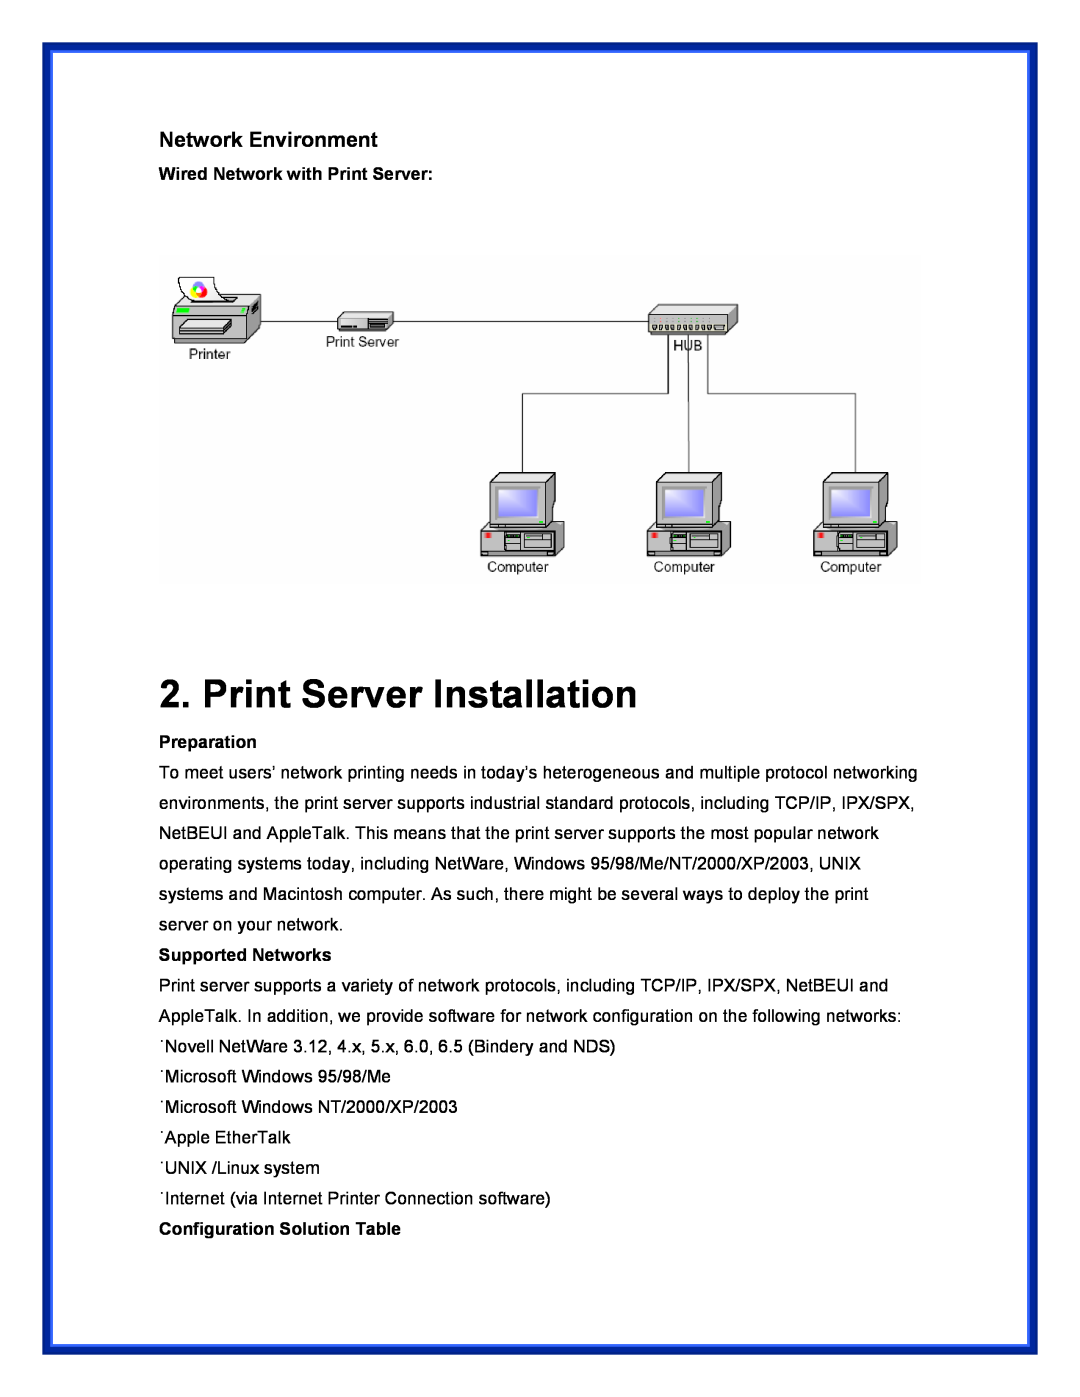 Epson (USB 2.0) user manual Print Server Installation, Network Environment, Wired Network with Print Server, Preparation 